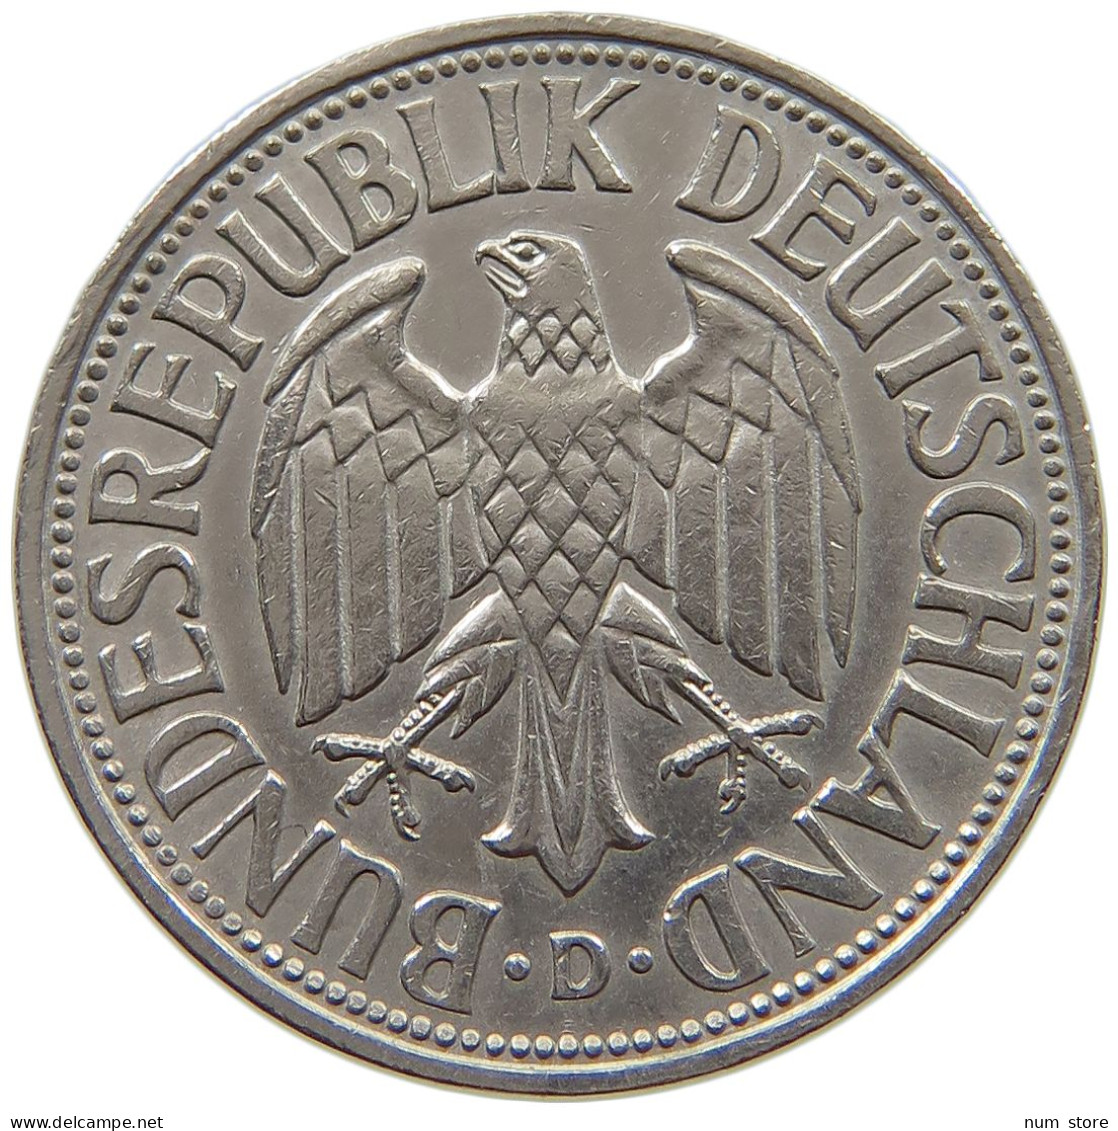 GERMANY WEST 1 MARK 1969 D #a069 0631 - 1 Mark